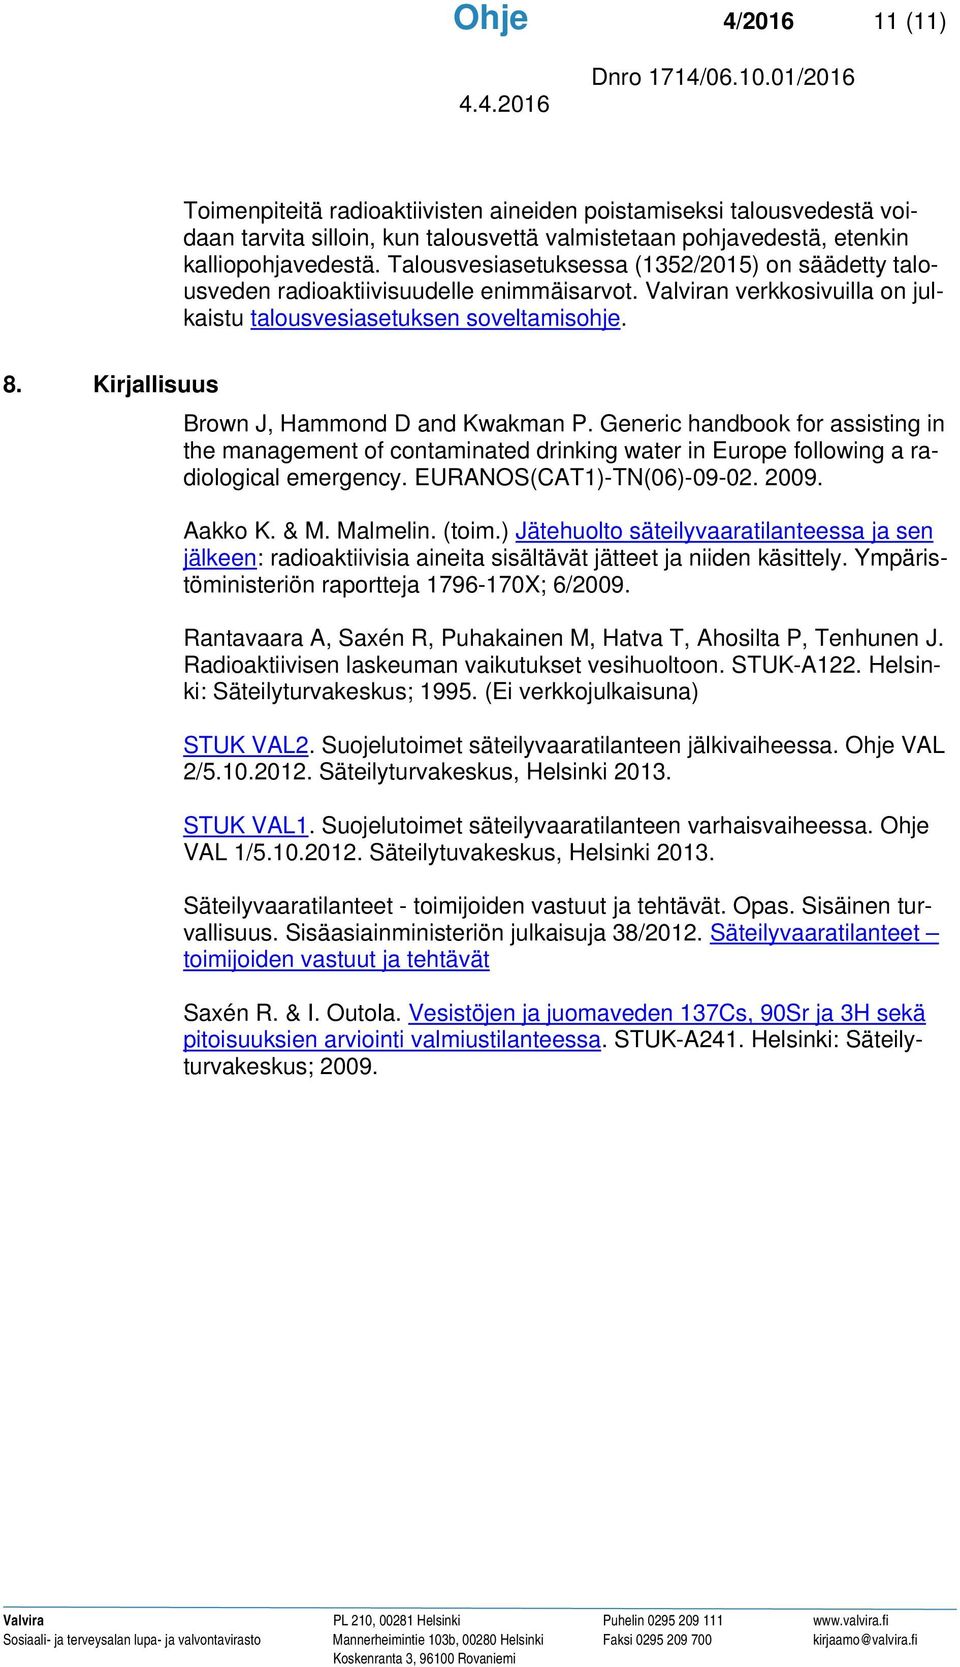 Kirjallisuus Brown J, Hammond D and Kwakman P. Generic handbook for assisting in the management of contaminated drinking water in Europe following a radiological emergency. EURANOS(CAT1)-TN(06)-09-02.